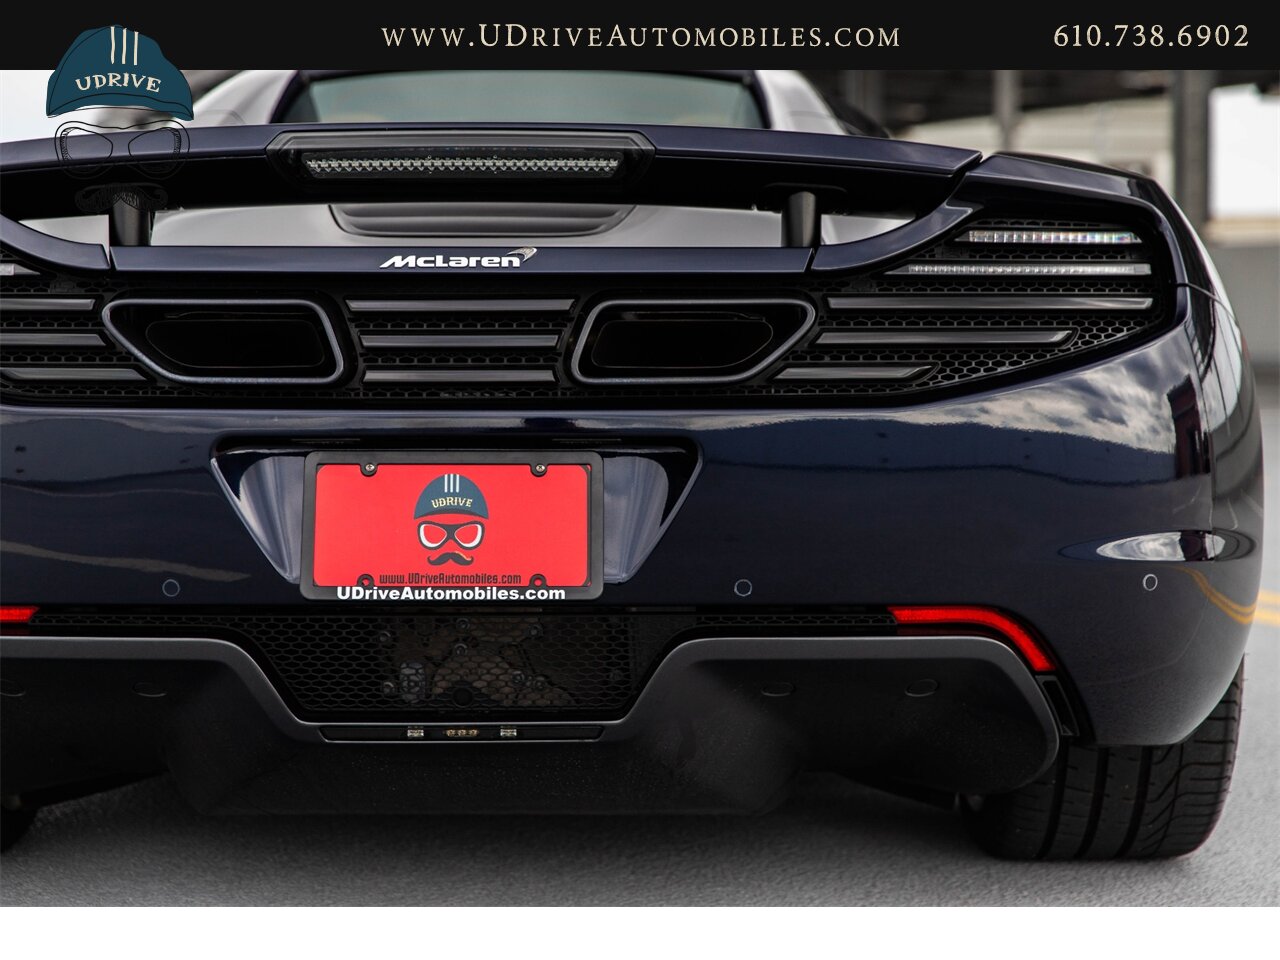 2013 McLaren MP4-12C Spider 1 Owner 6k Miles Carbon Fiber Full Leather  Sapphire Black over Natural Tan Leather - Photo 21 - West Chester, PA 19382